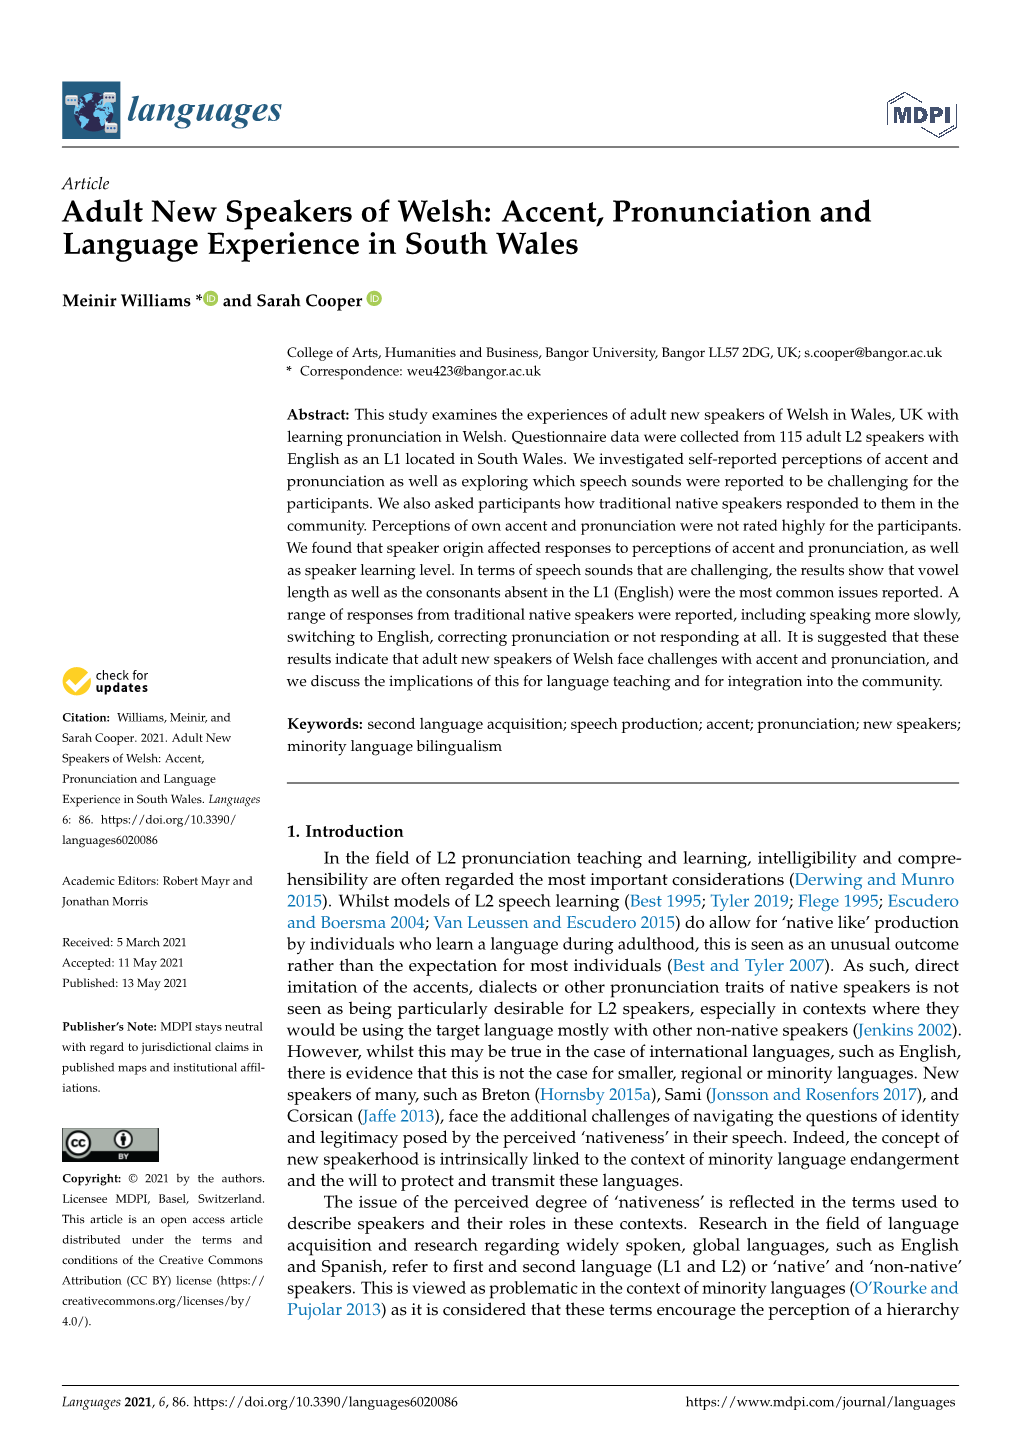 Adult New Speakers of Welsh: Accent, Pronunciation and Language Experience in South Wales